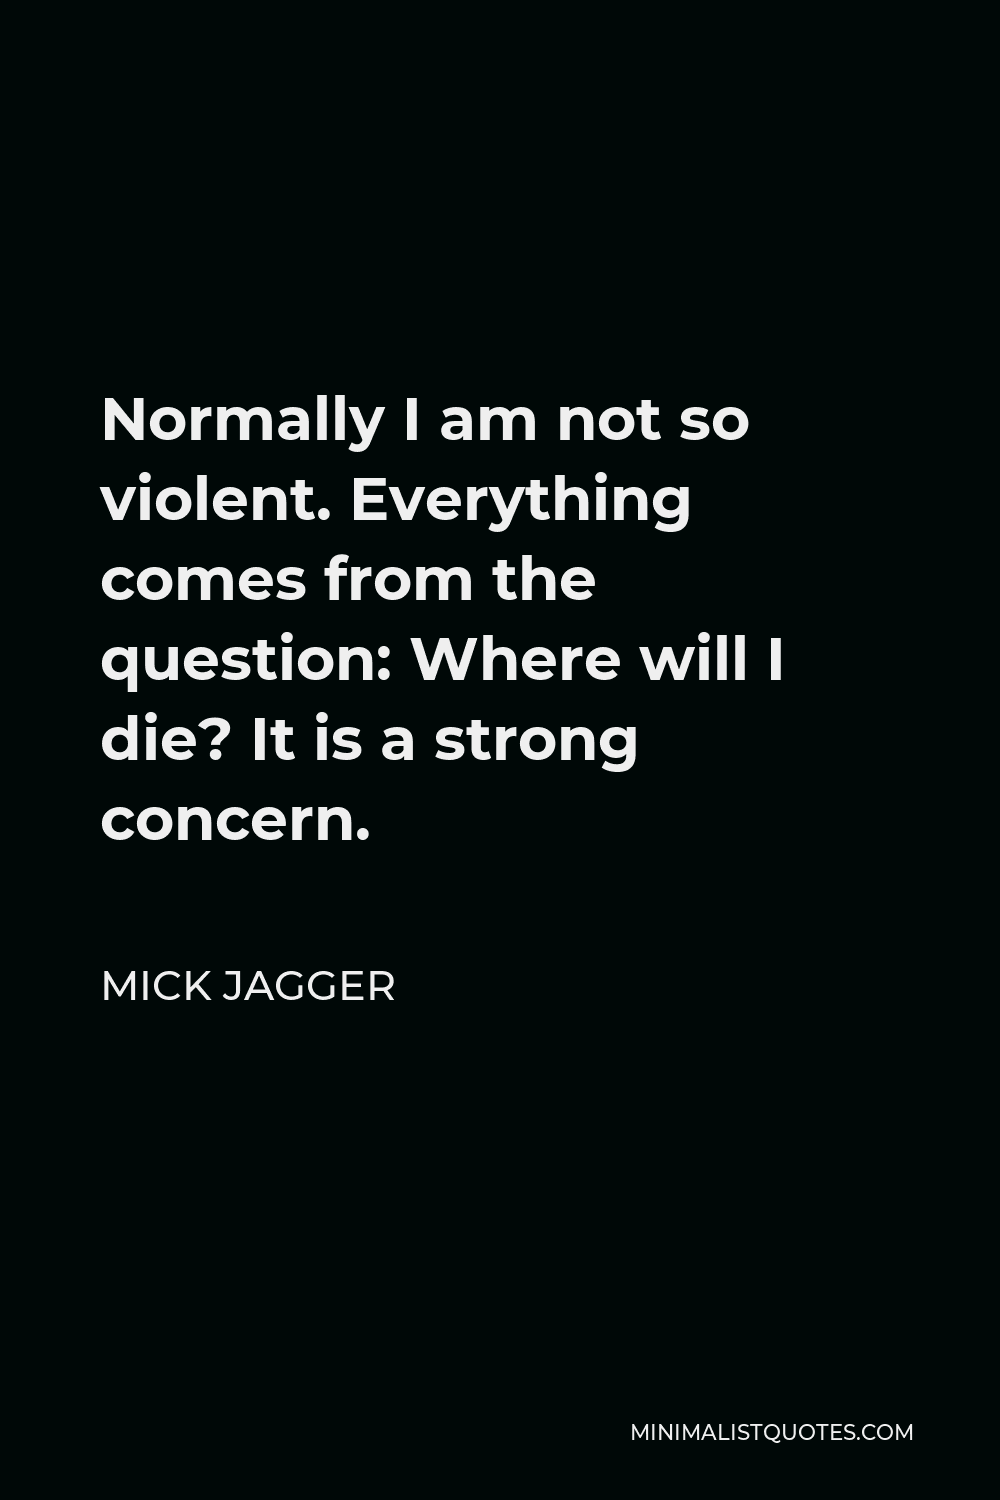 Mick Jagger Quote - Normally I am not so violent. Everything comes from the question: Where will I die? It is a strong concern.